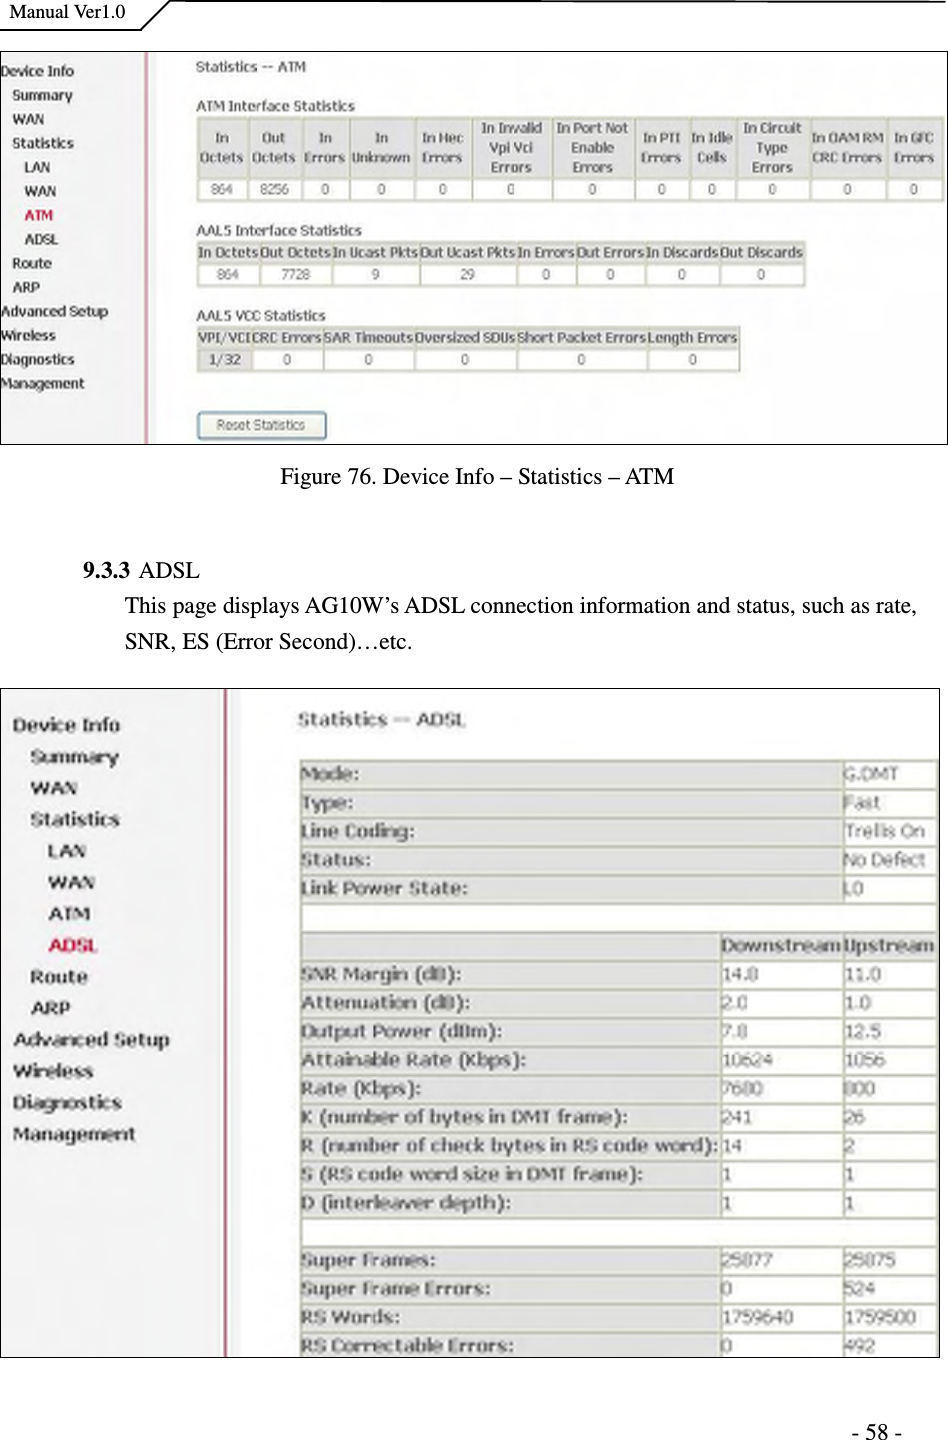    Manual Ver1.0                                                                      - 58 -   Figure 76. Device Info – Statistics – ATM  9.3.3 ADSL This page displays AG10W’s ADSL connection information and status, such as rate, SNR, ES (Error Second)…etc.    